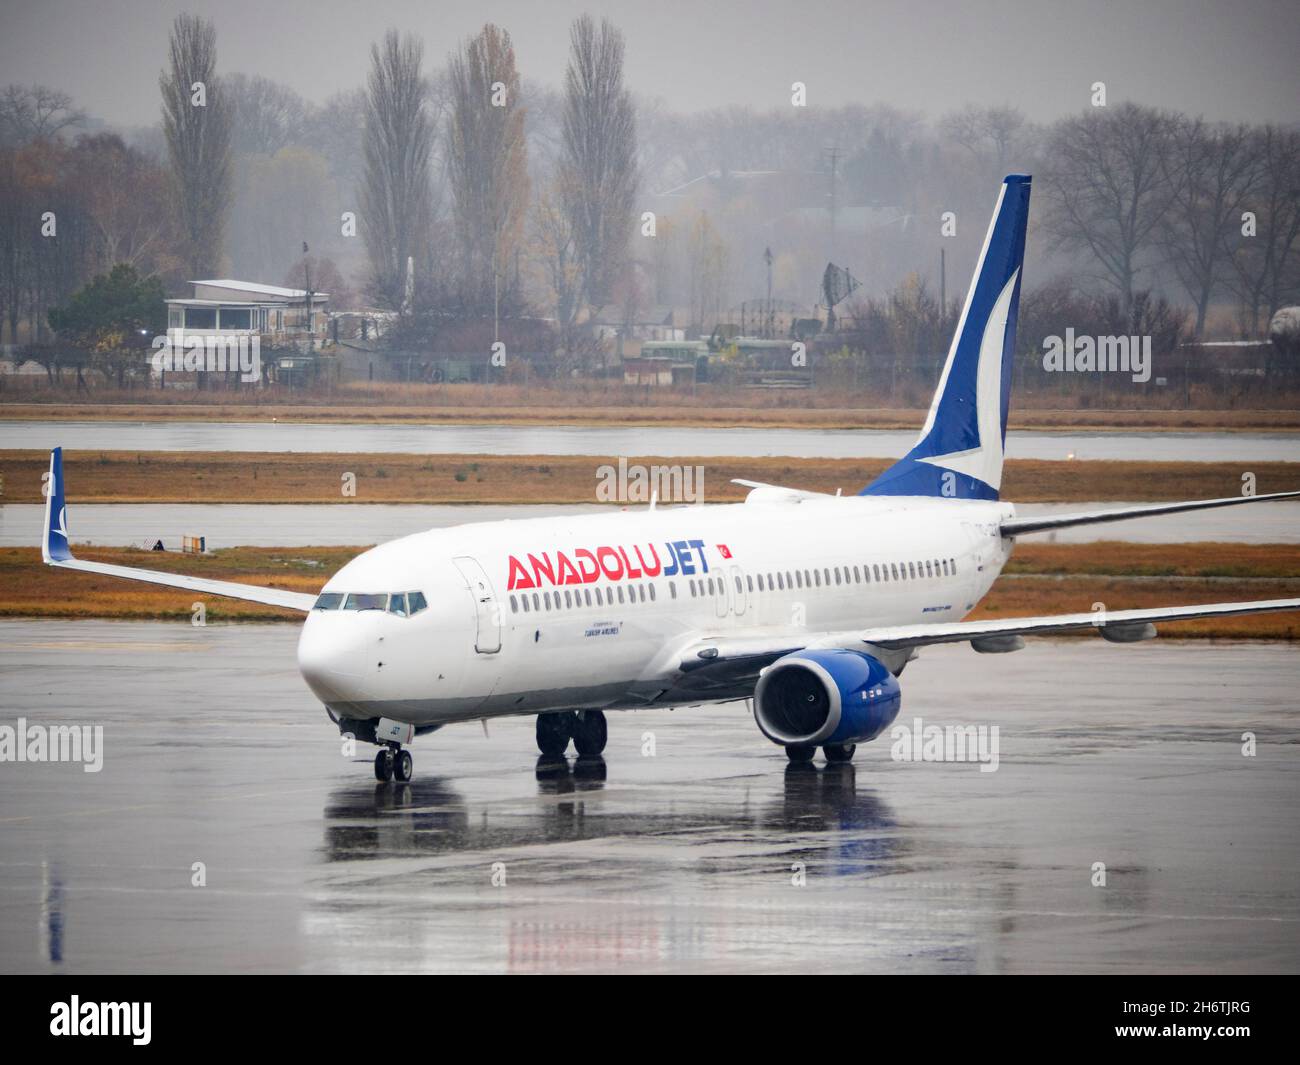 Kiev, Ukraine. 2nd Nov, 2021. An Anadolu aircraft at Boryspil Airport. Since the beginning of 2021, Boryspil Airport has served more than 8 million passengers. Passenger traffic recovered by 71% compared to pre-crisis figures in October 2019. (Credit Image: © Igor Golovniov/SOPA Images via ZUMA Press Wire) Stock Photo